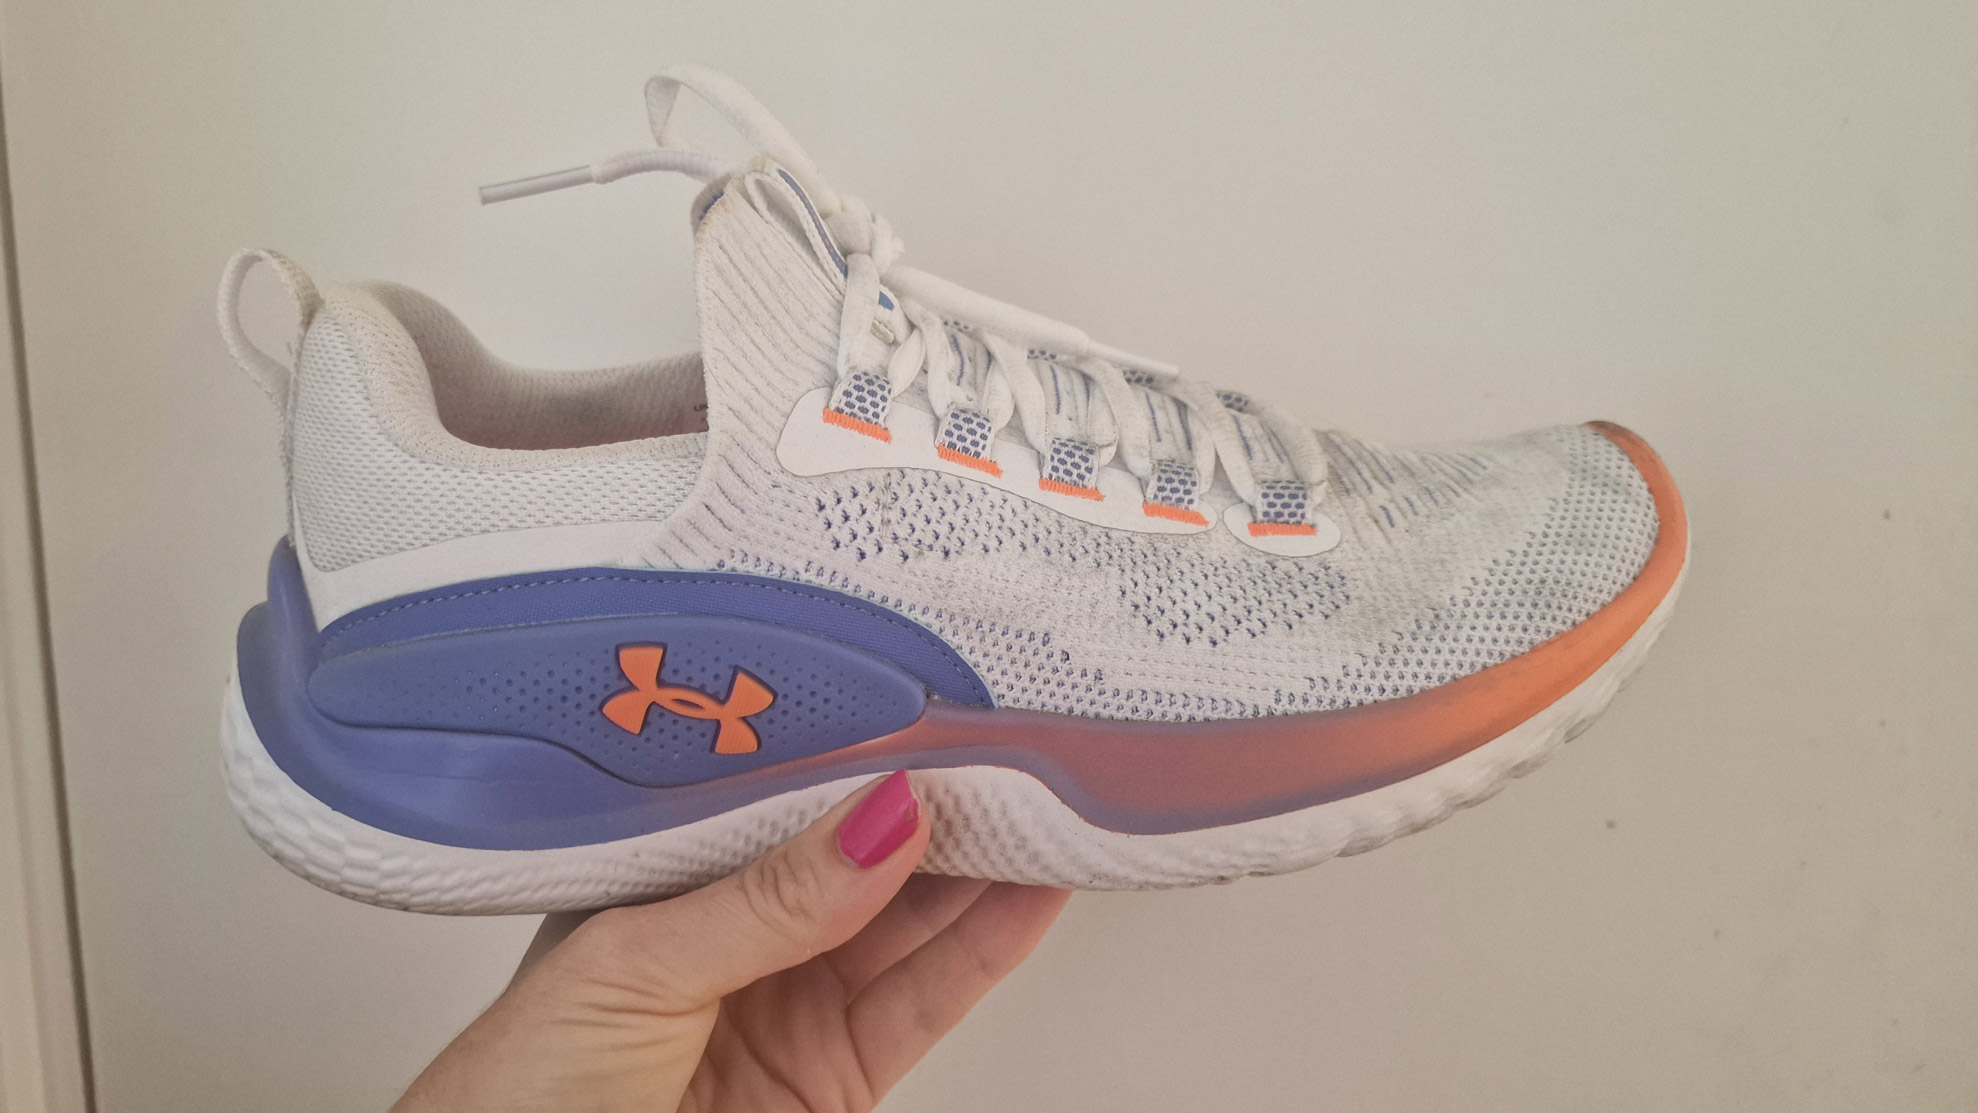 Under Armour Flow Dynamic review: Built for cross-training comfort ...